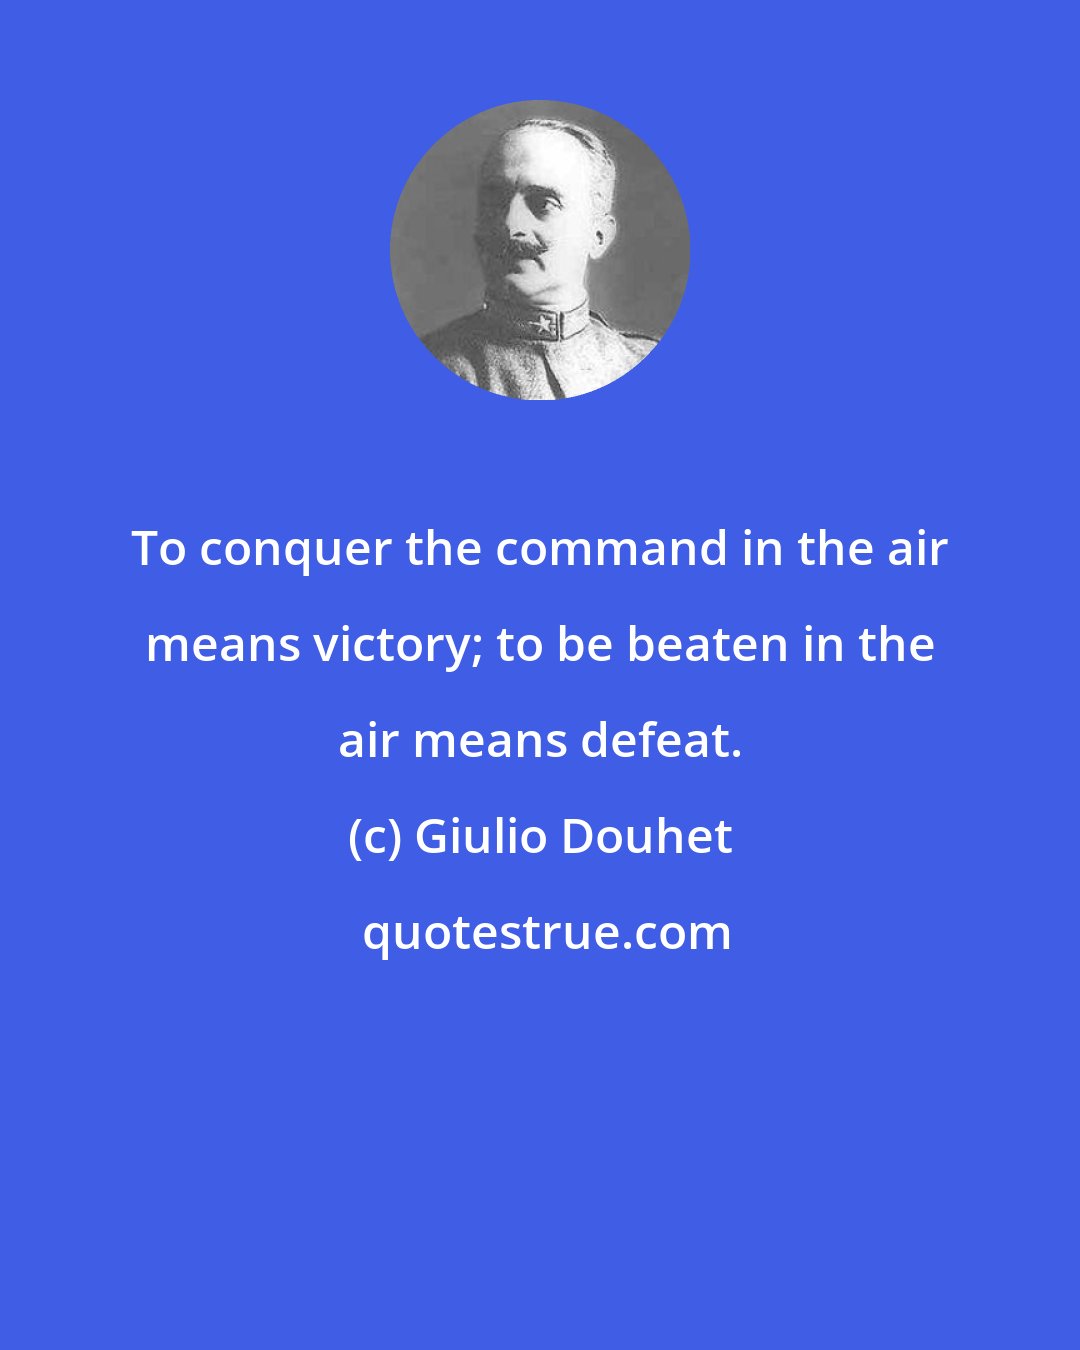 Giulio Douhet: To conquer the command in the air means victory; to be beaten in the air means defeat.